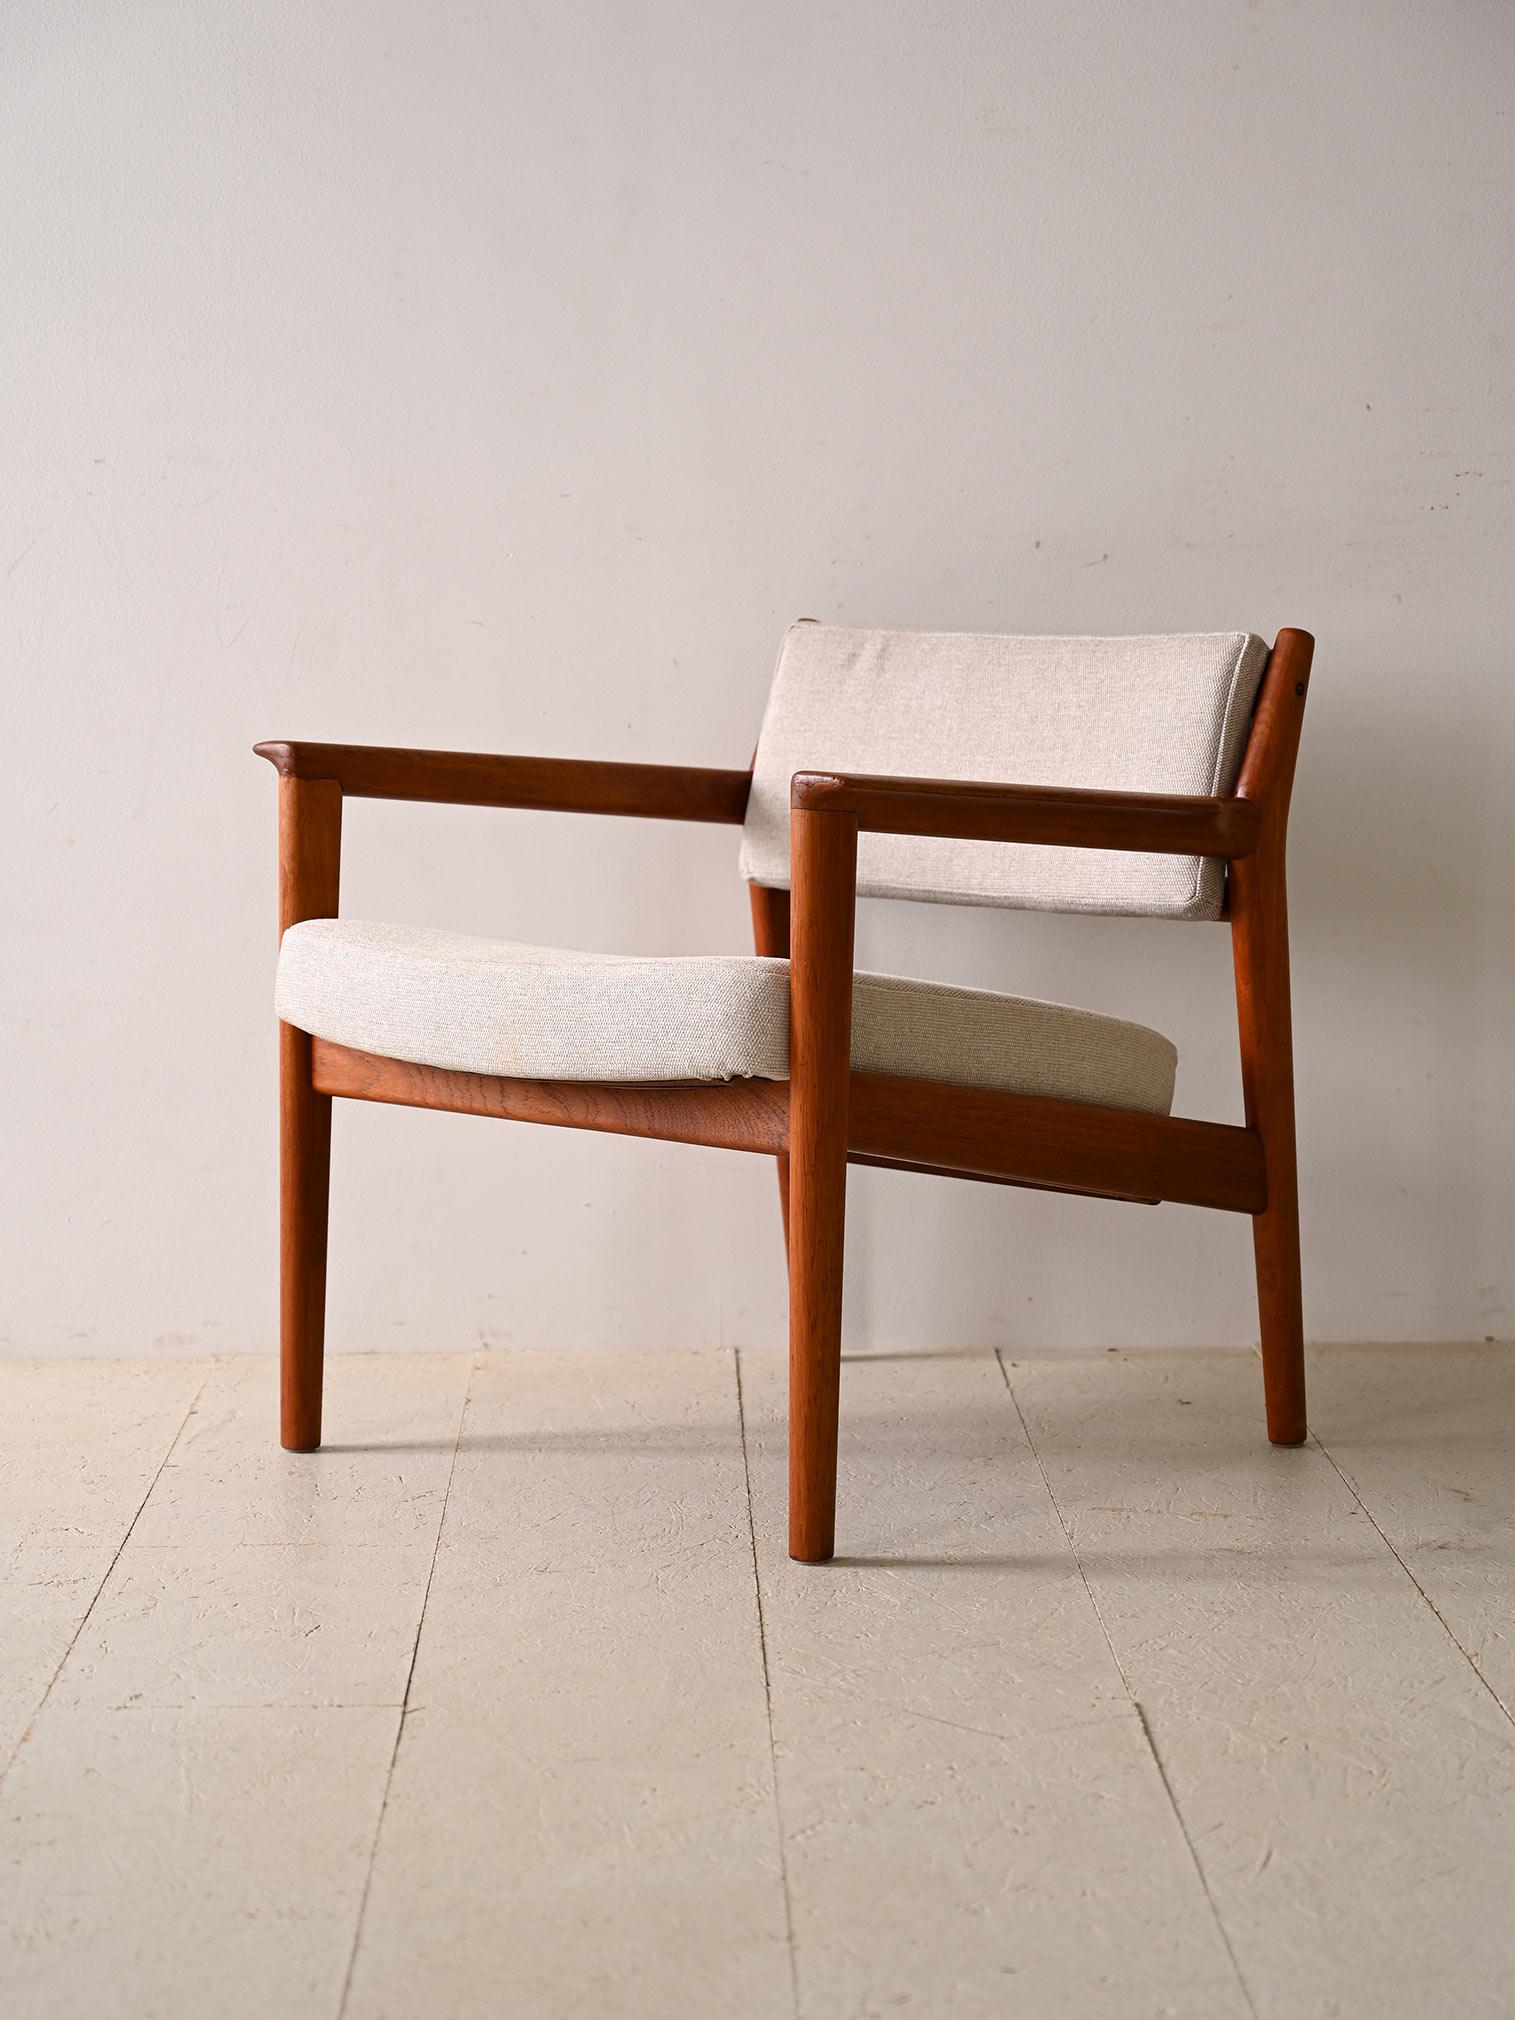 Minimalist teak armchair with upholstered seat. Add a touch of simplicity and sophistication to your space with this armchair with clean lines and timeless design. Made with a high-quality teak frame, this armchair features the slightly sloping seat